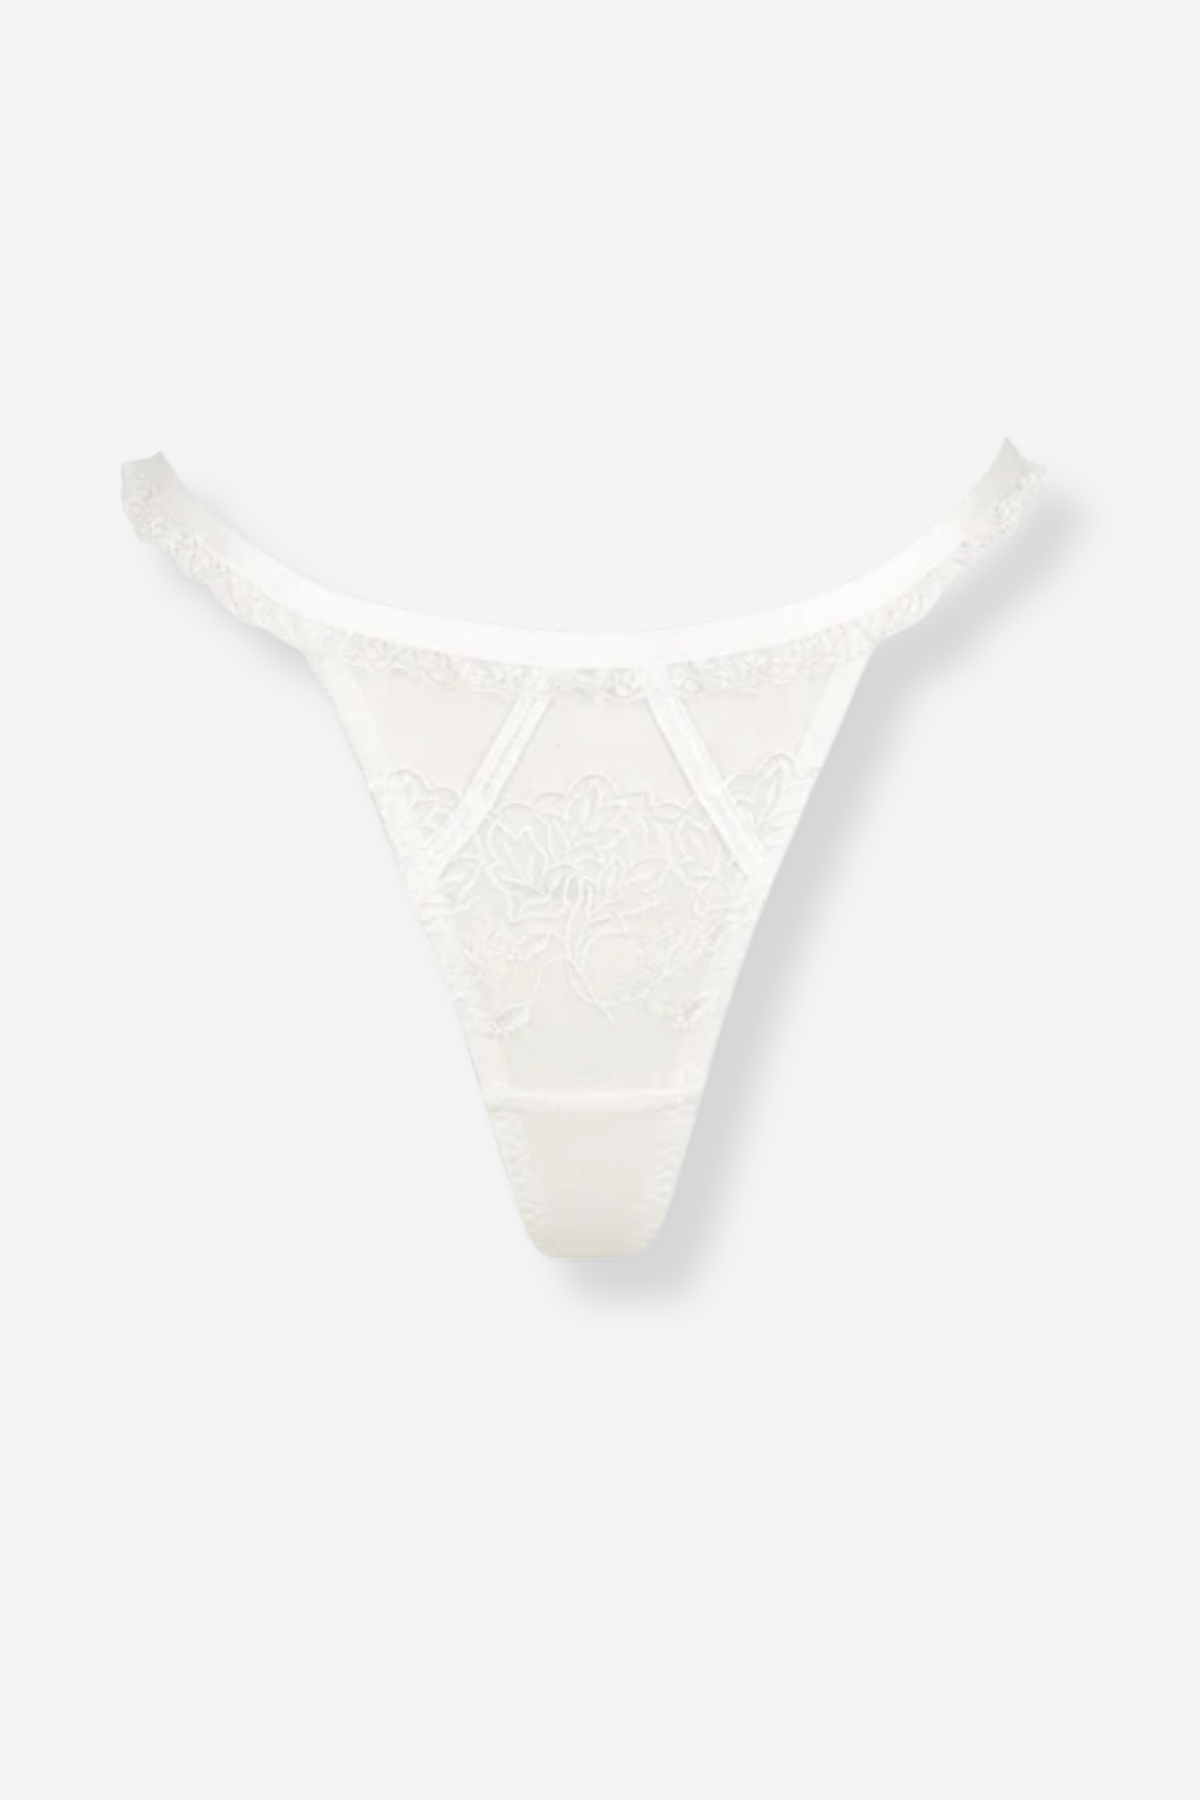 Bowie Thong Olive